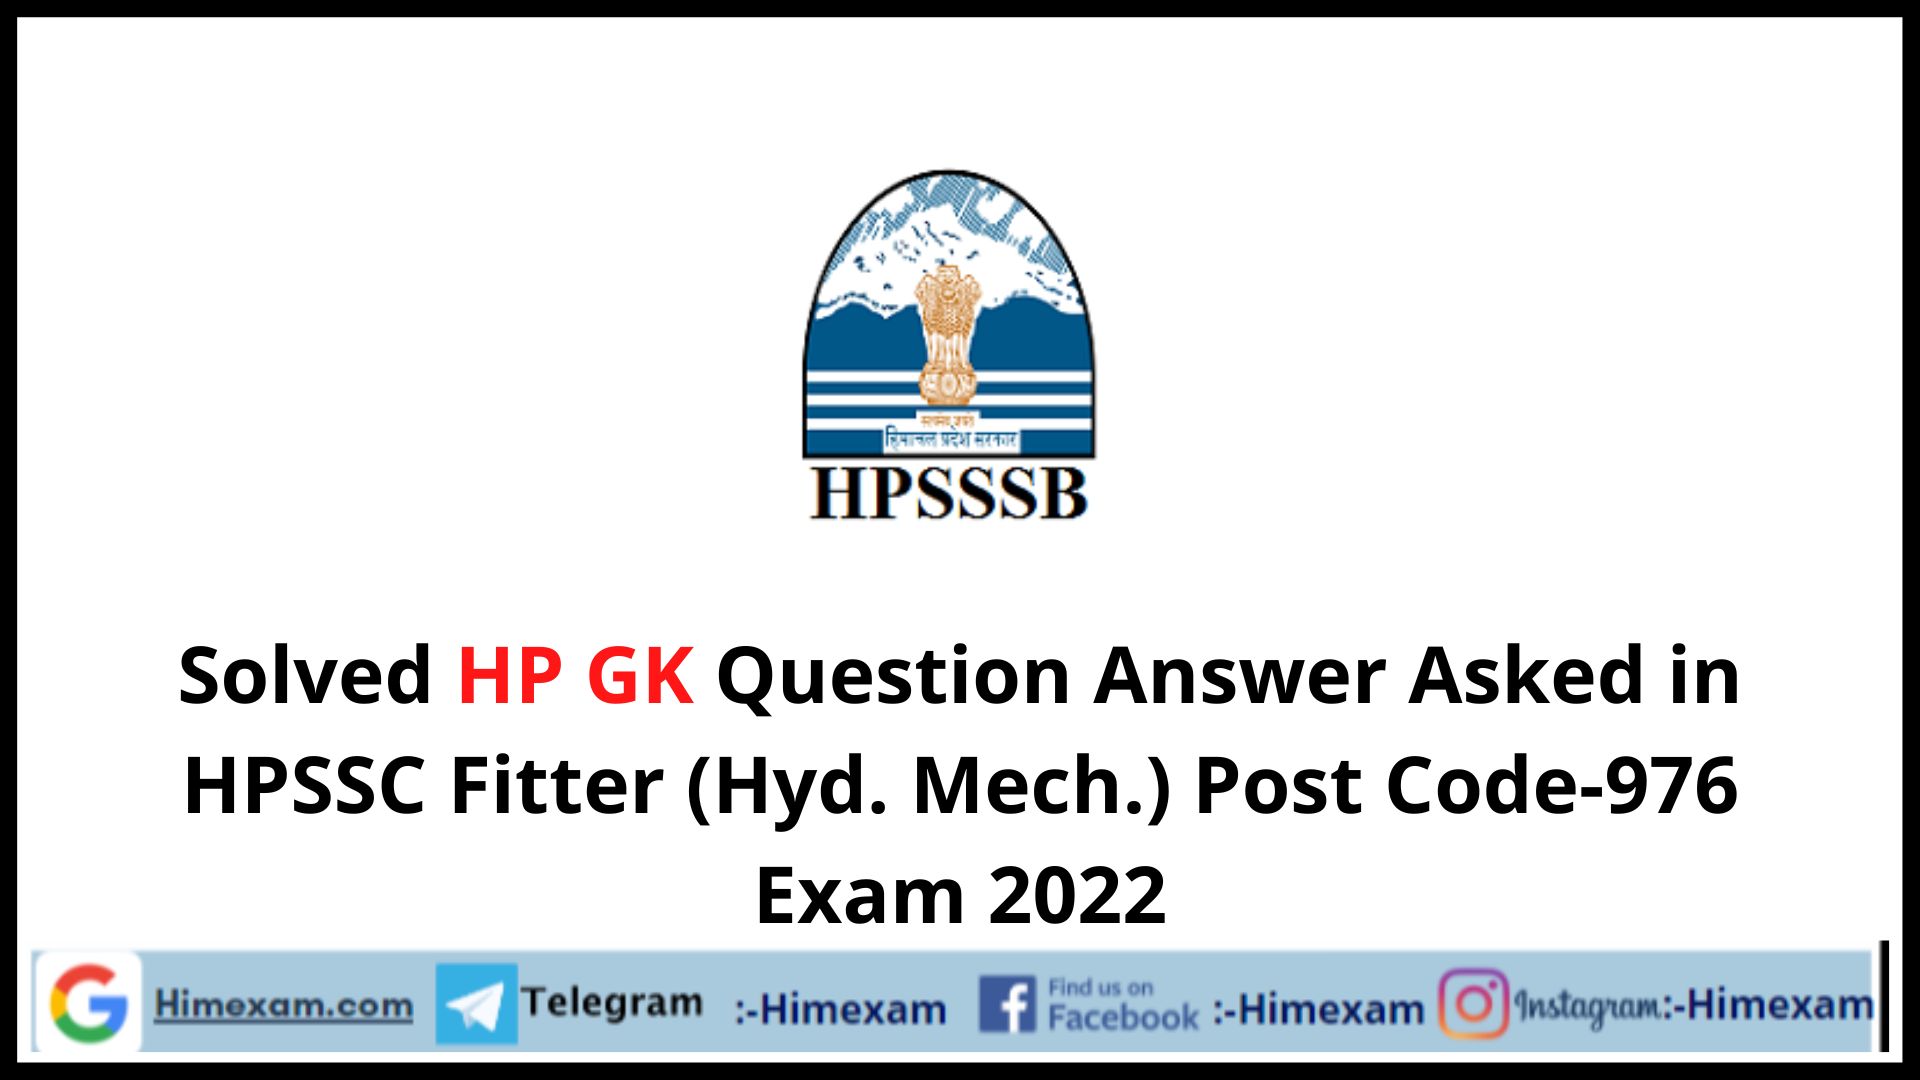 Solved HP GK Question Answer Asked in HPSSC Fitter (Hyd. Mech.) Post Code-976 Exam 2022